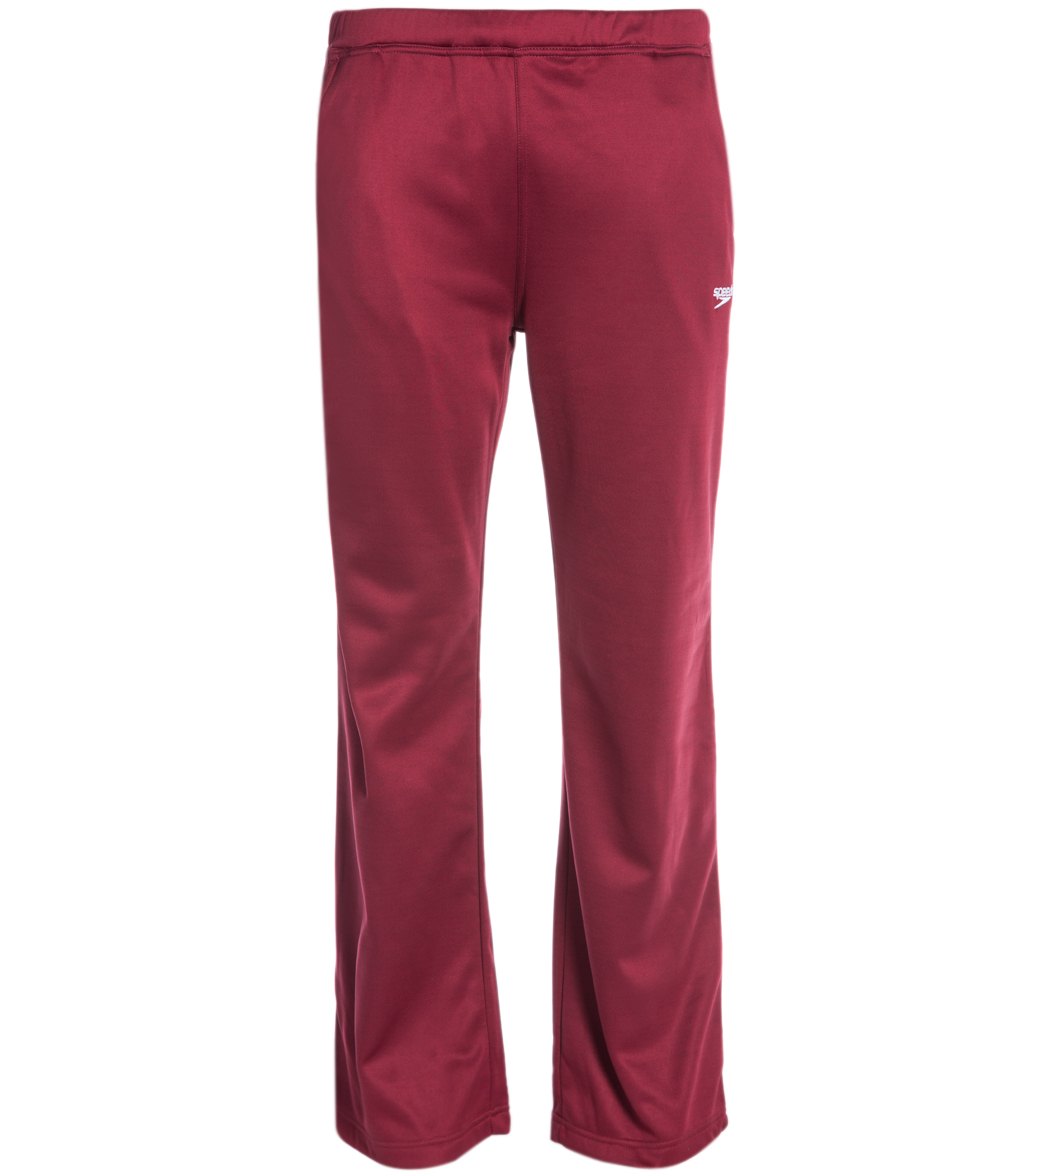 Speedo Male Sonic Warm Up Pants - Maroon Xxsmall Size X-Small Polyester - Swimoutlet.com